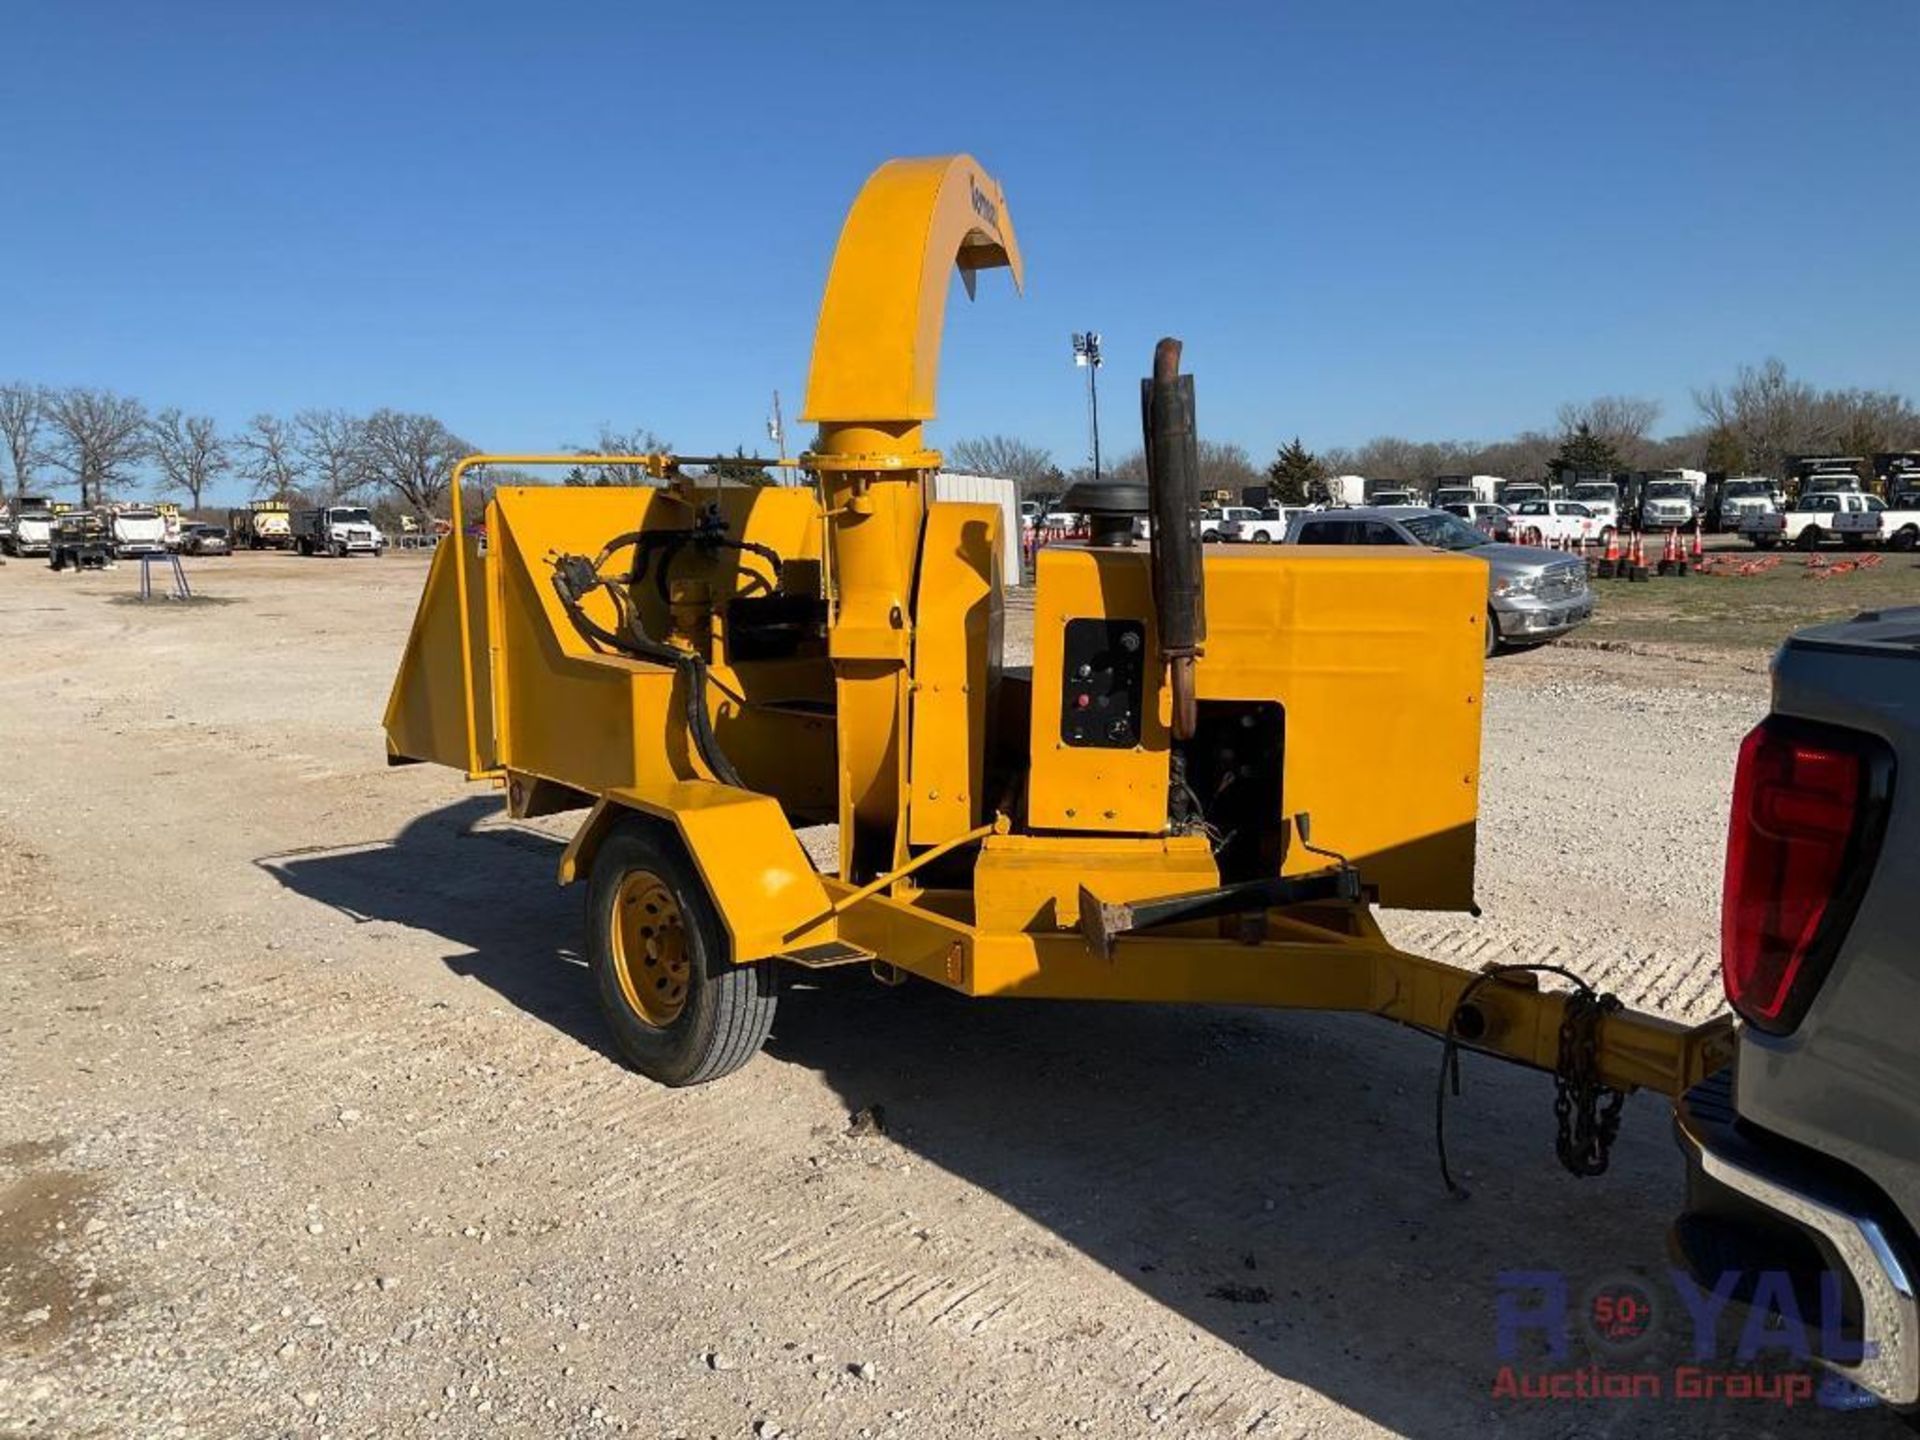 1995 Vermeer BC1230 S/A Towable Wood Chipper - Image 2 of 17